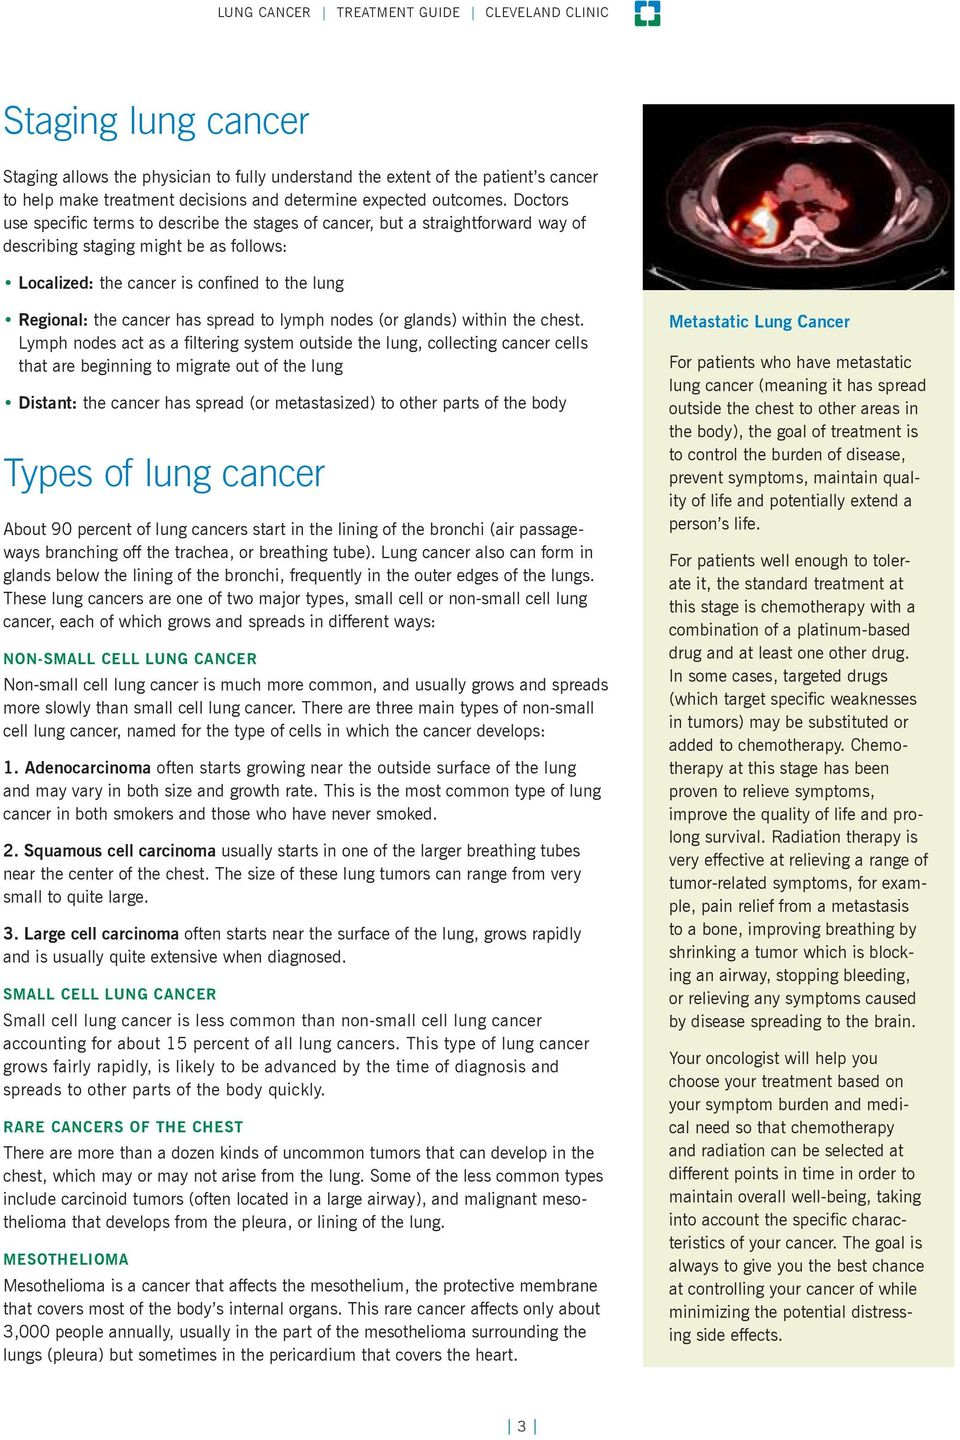 Doctors use specific terms to describe the stages of cancer, but a straightforward way of describing staging might be as follows: Localized: the cancer is confined to the lung Regional: the cancer